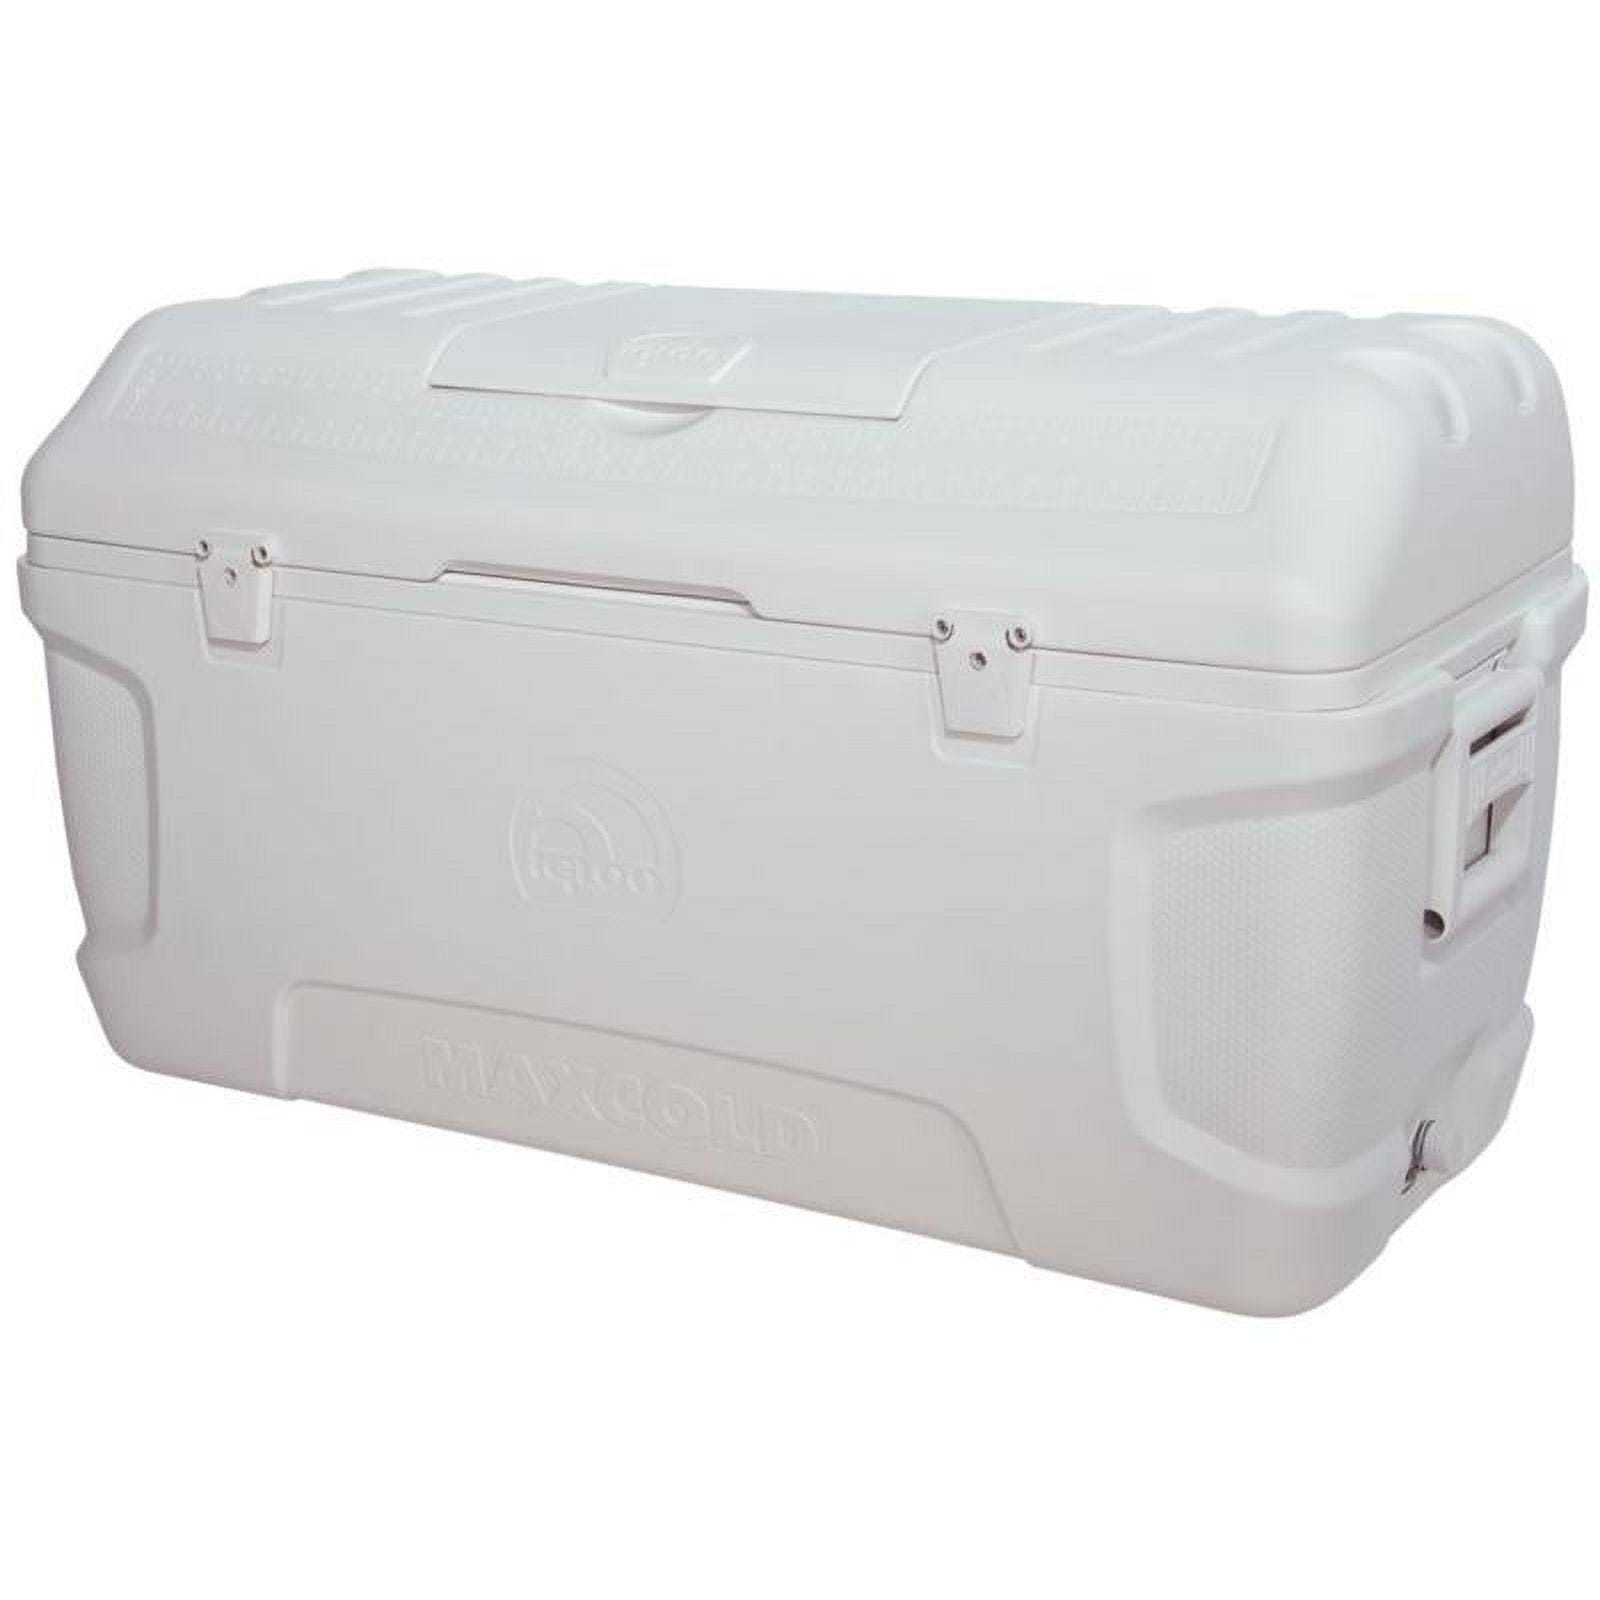 MaxCold 165 qt Igloo Cooler for Great Outdoors, Sports, and Patio | Image